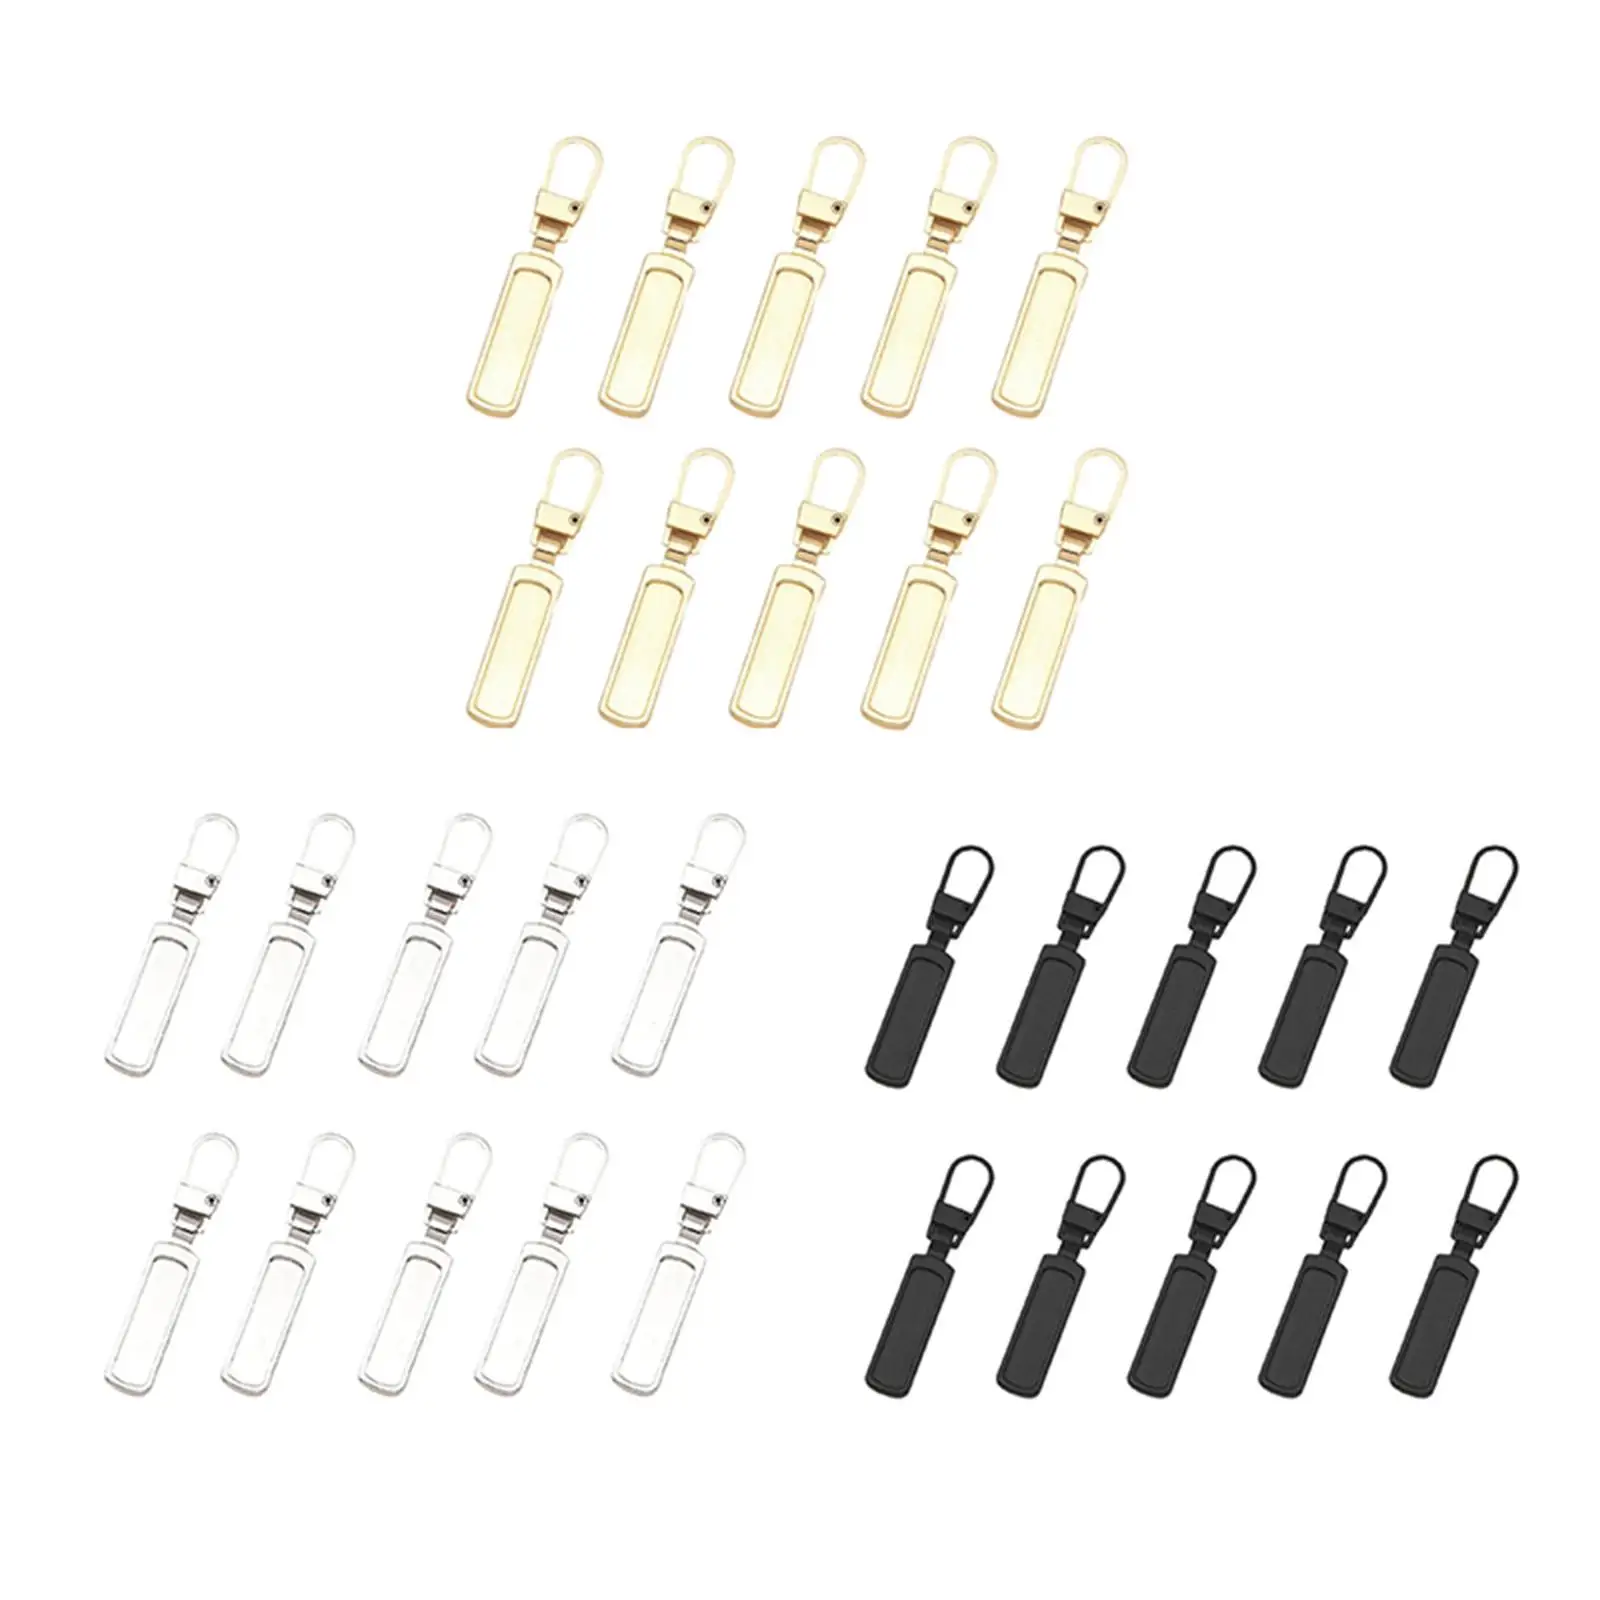 10x Zipper Heads Fasteners Repair Kit Replace Zip Pulls for Clothes Jeans